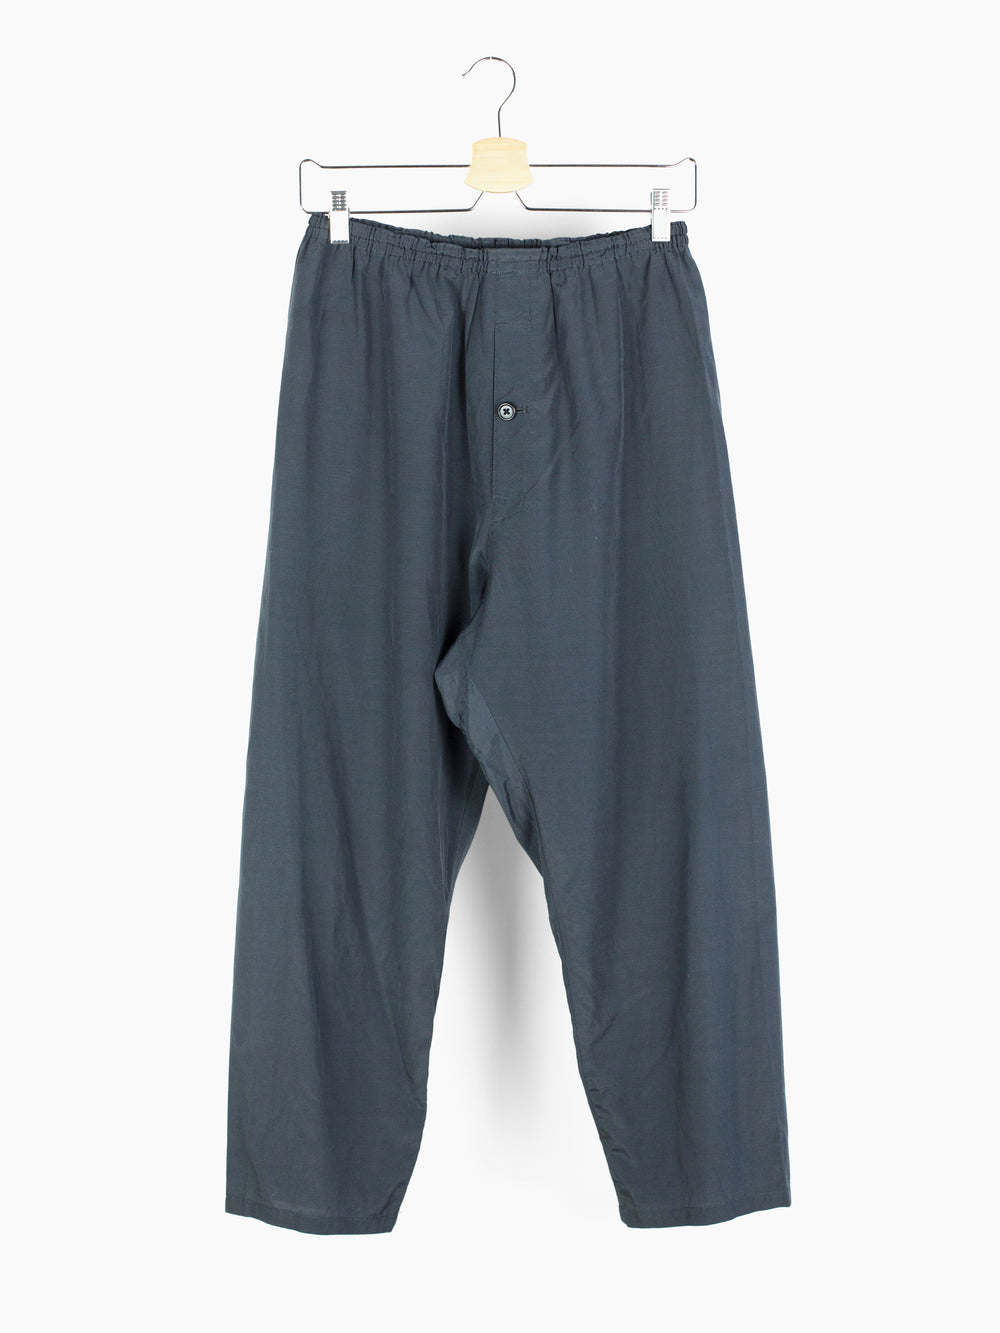 Yohji Yamamoto Pour Homme 90s Lining Easy Trousers